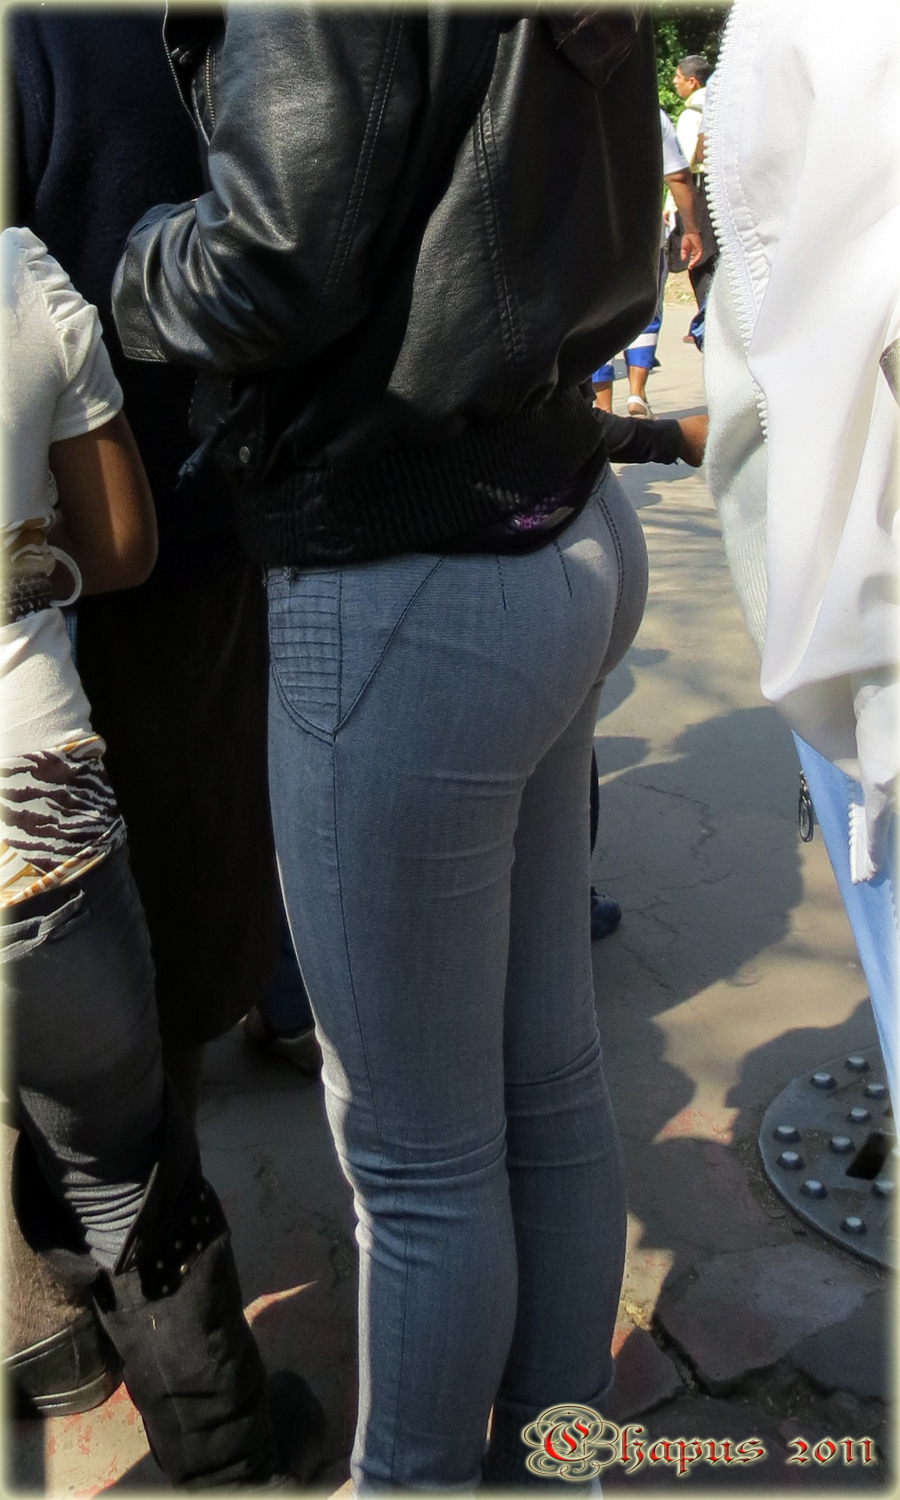 Perfect Butt In Jeans 51